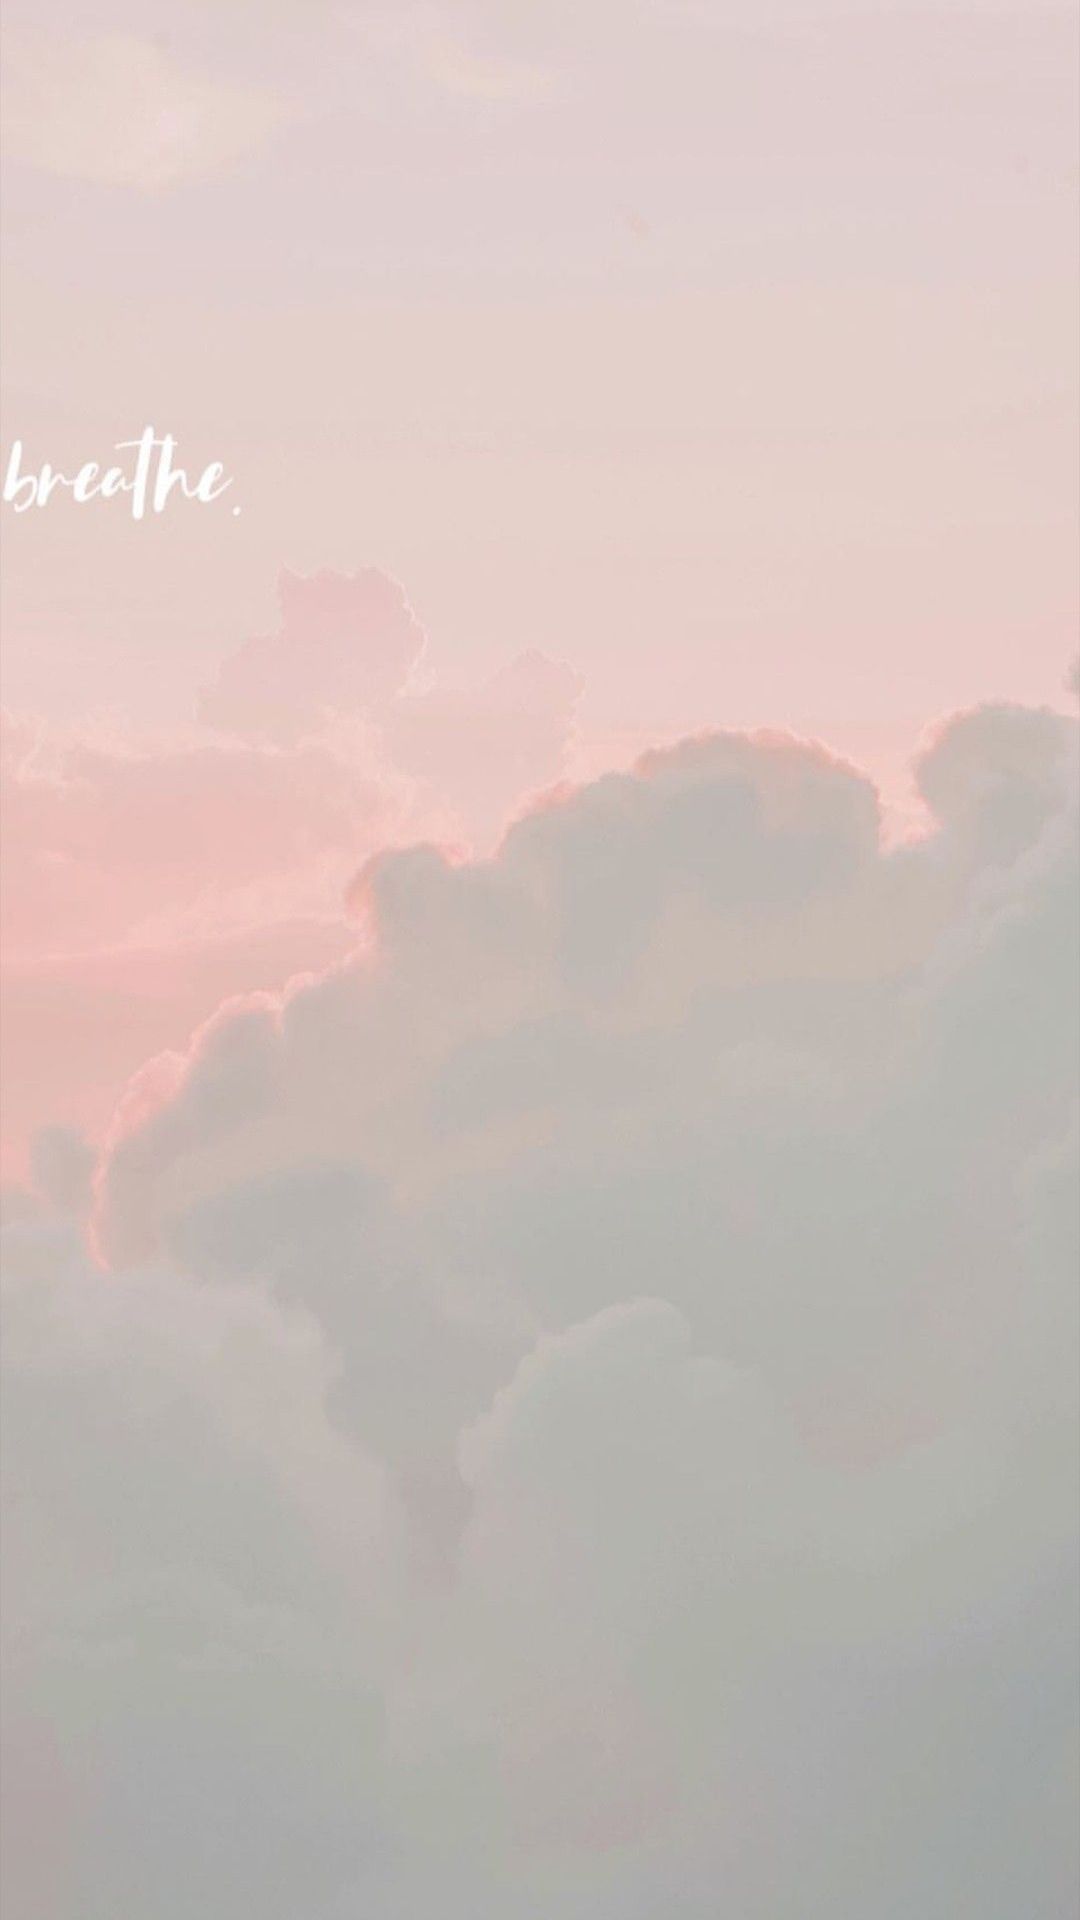 IPhone wallpaper of a pink sky with clouds and the word 